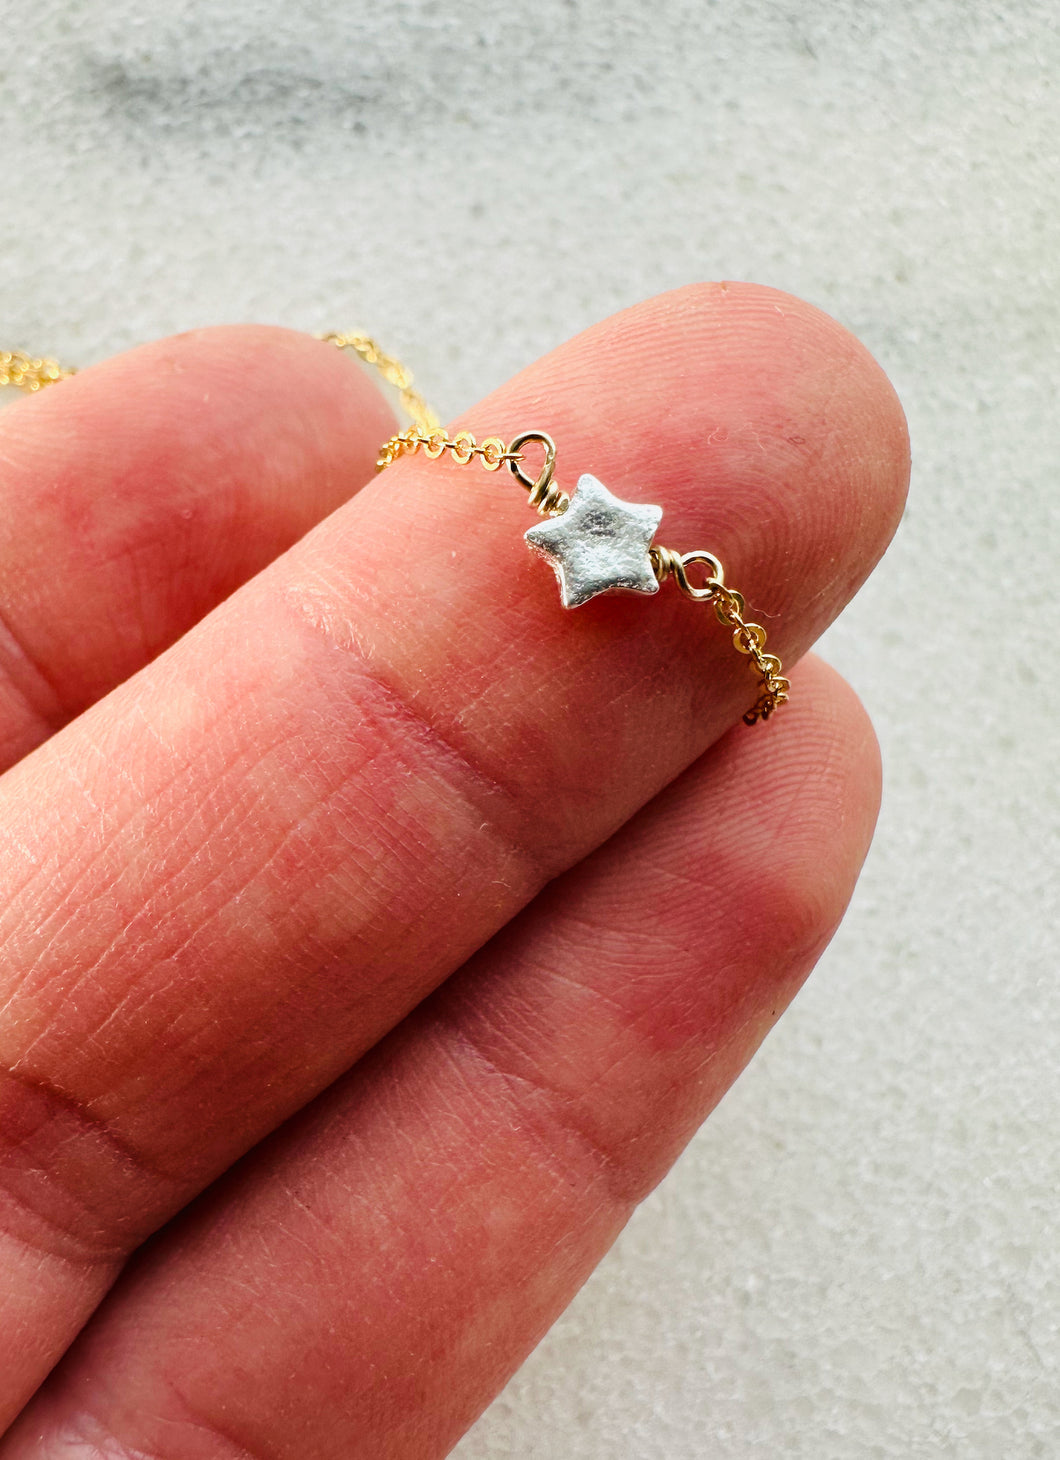 Pixie Star Necklace - 14k Gold Fill & Fine Silver